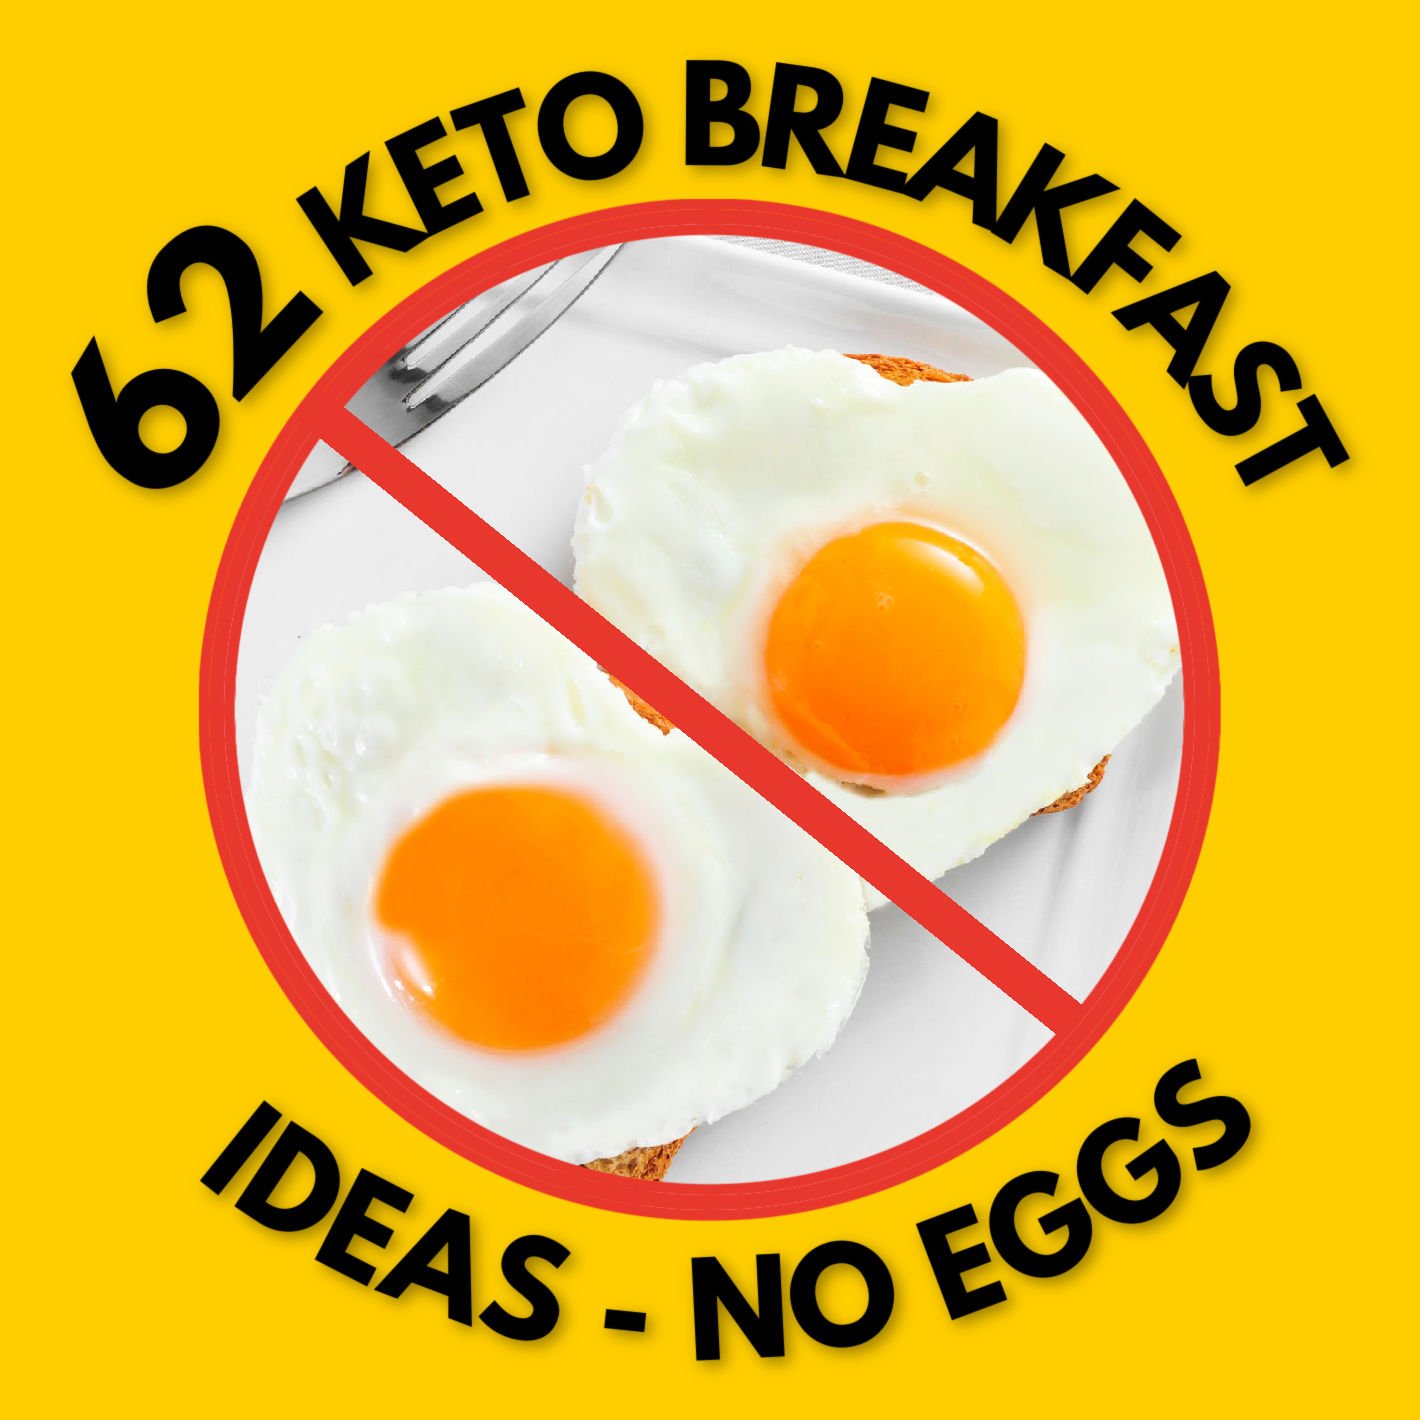 fried eggs in red circle with text